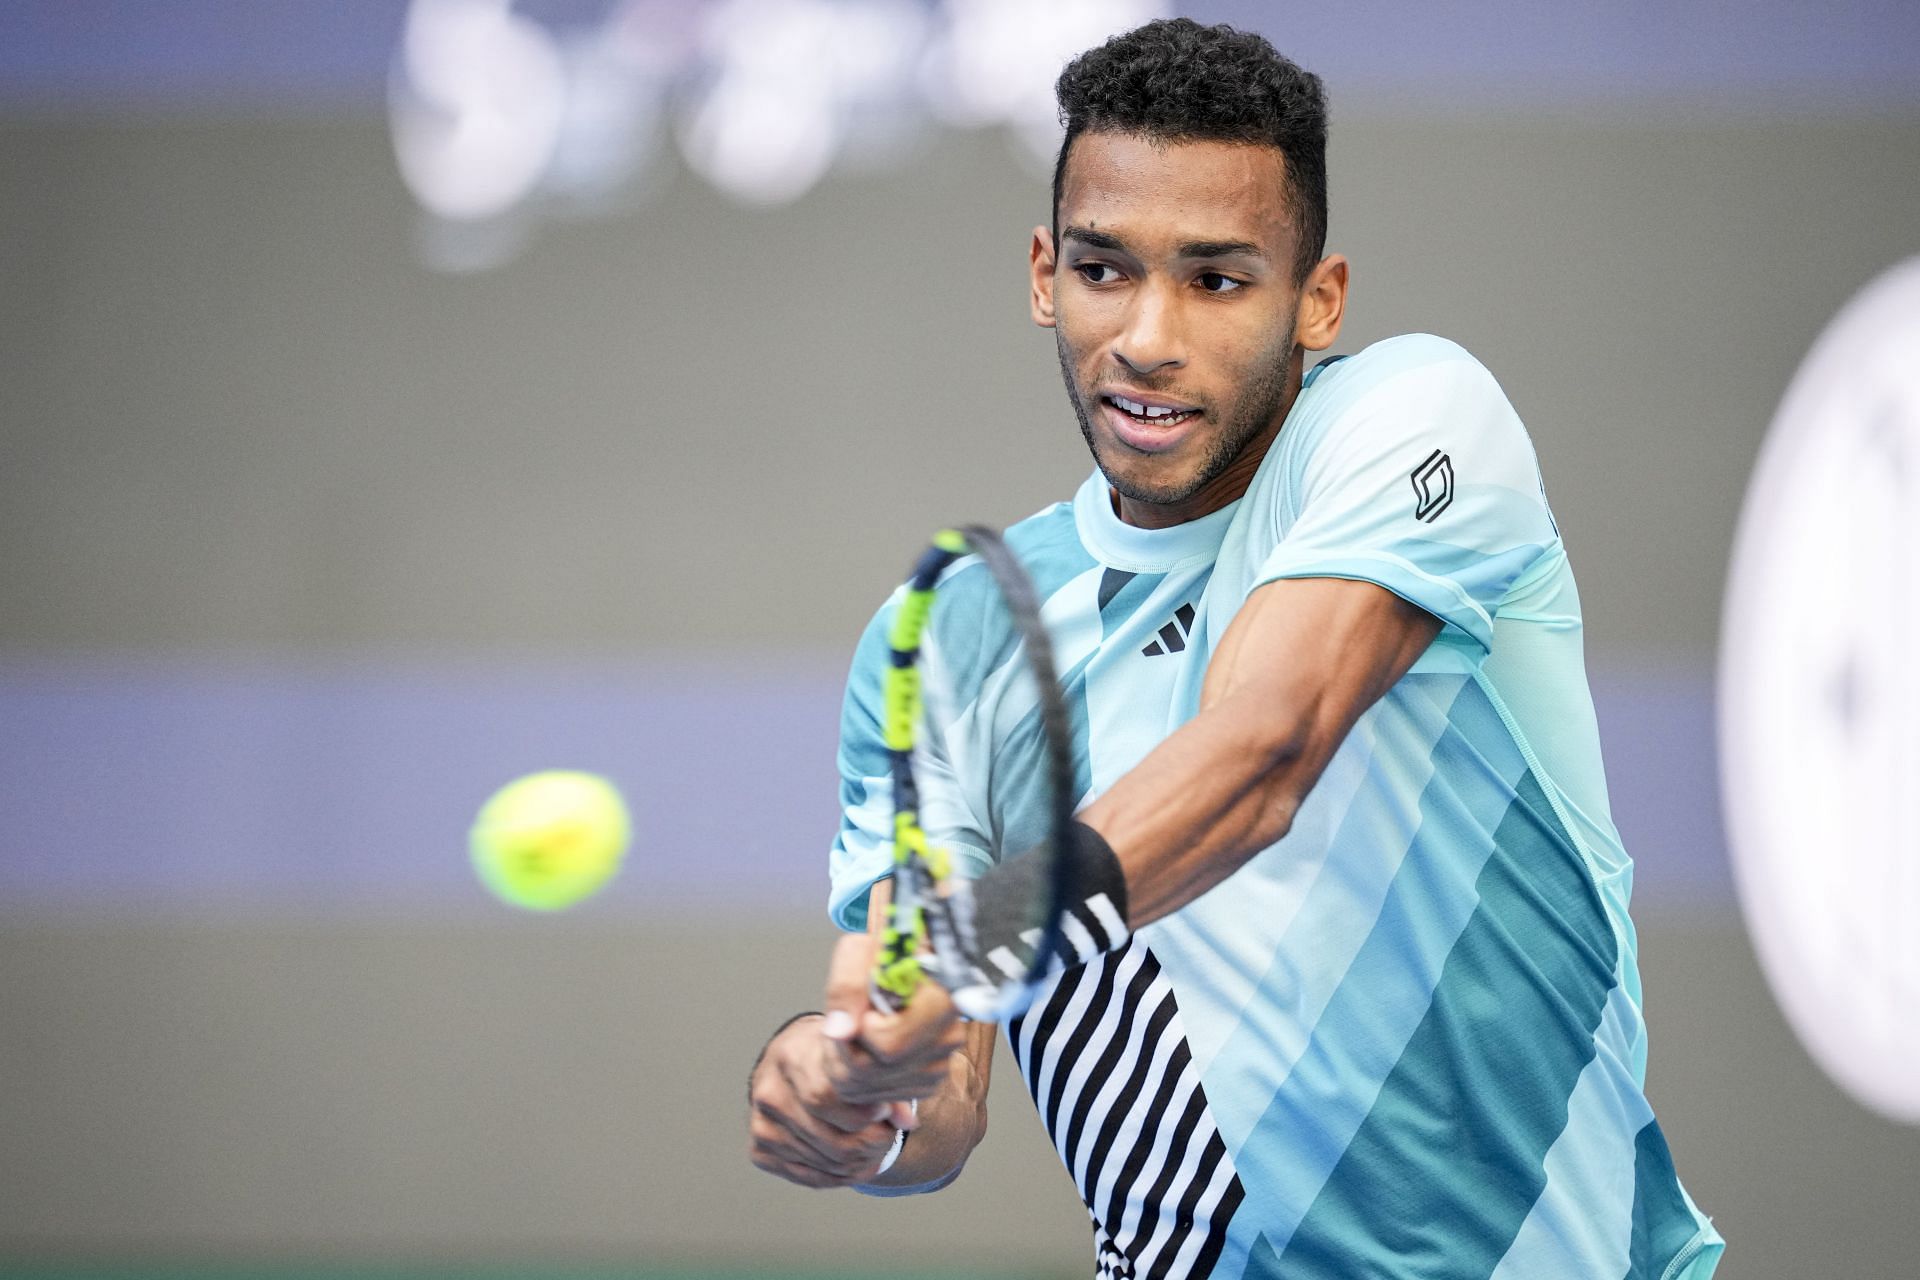 Auger-Aliassime at the 2023 China Open